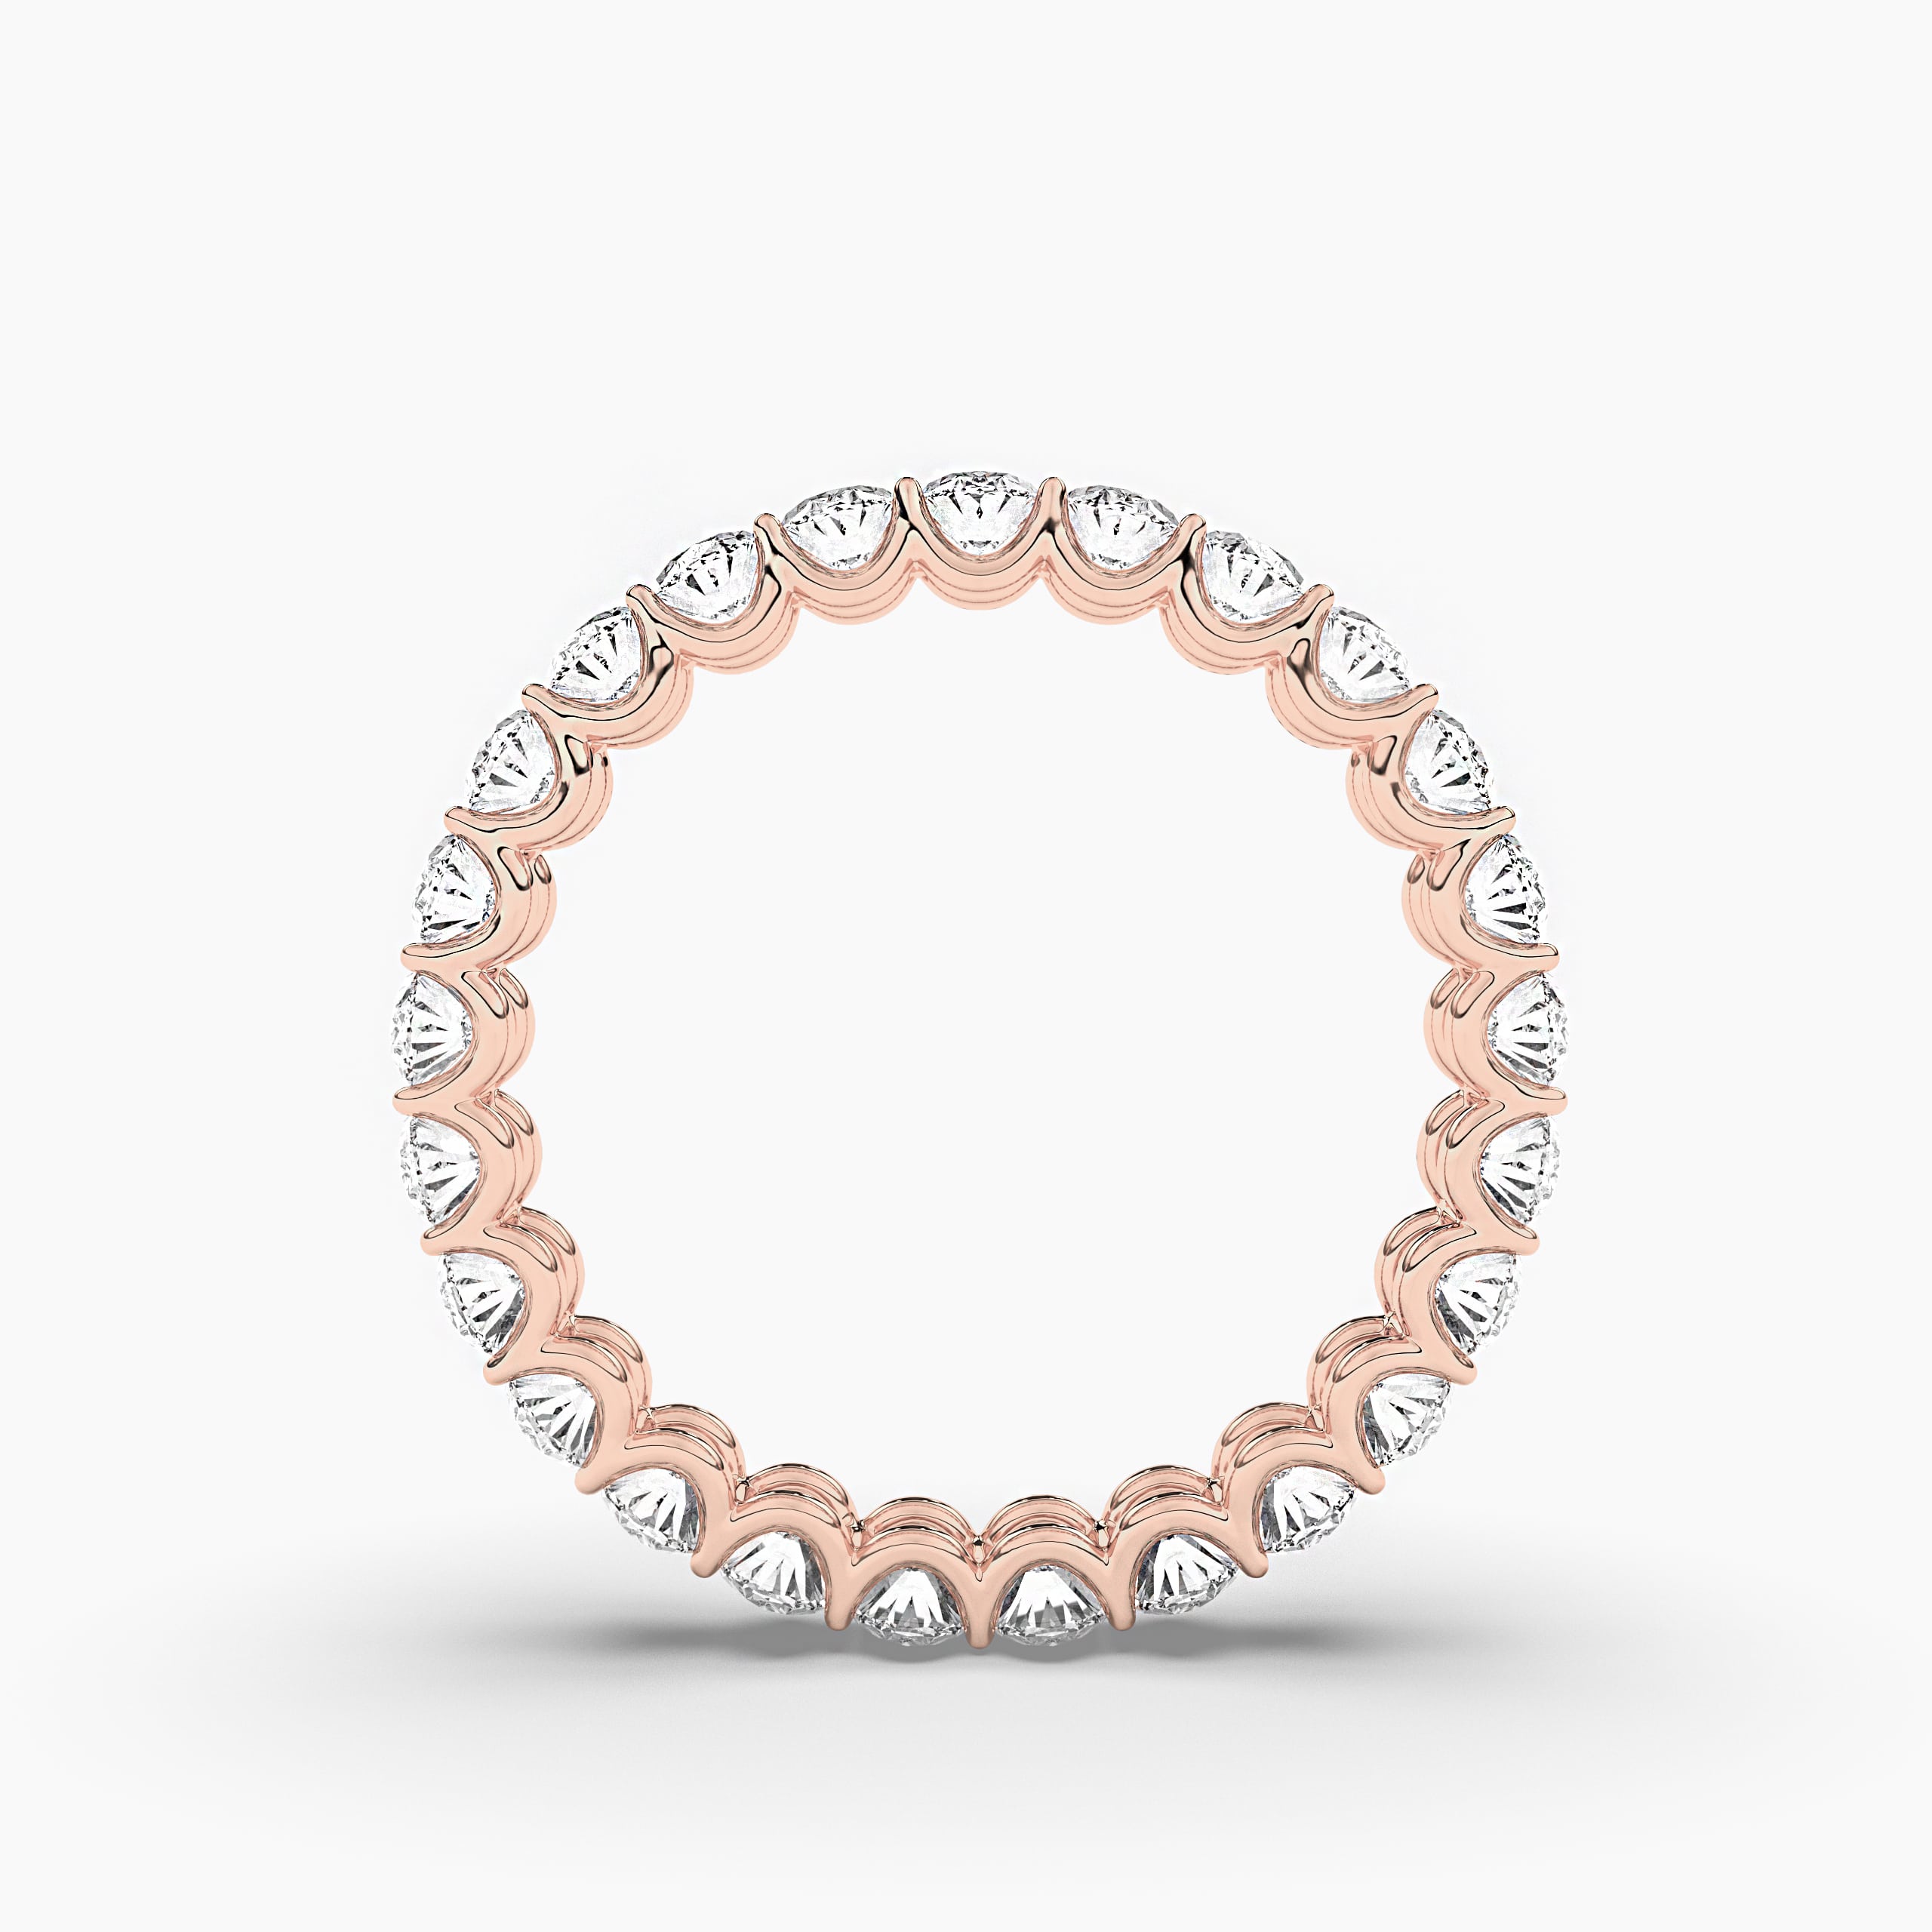 OVAL CUT DIAMOND ETERNITY BAND IN ROSE GOLD FOR WOMAN'S